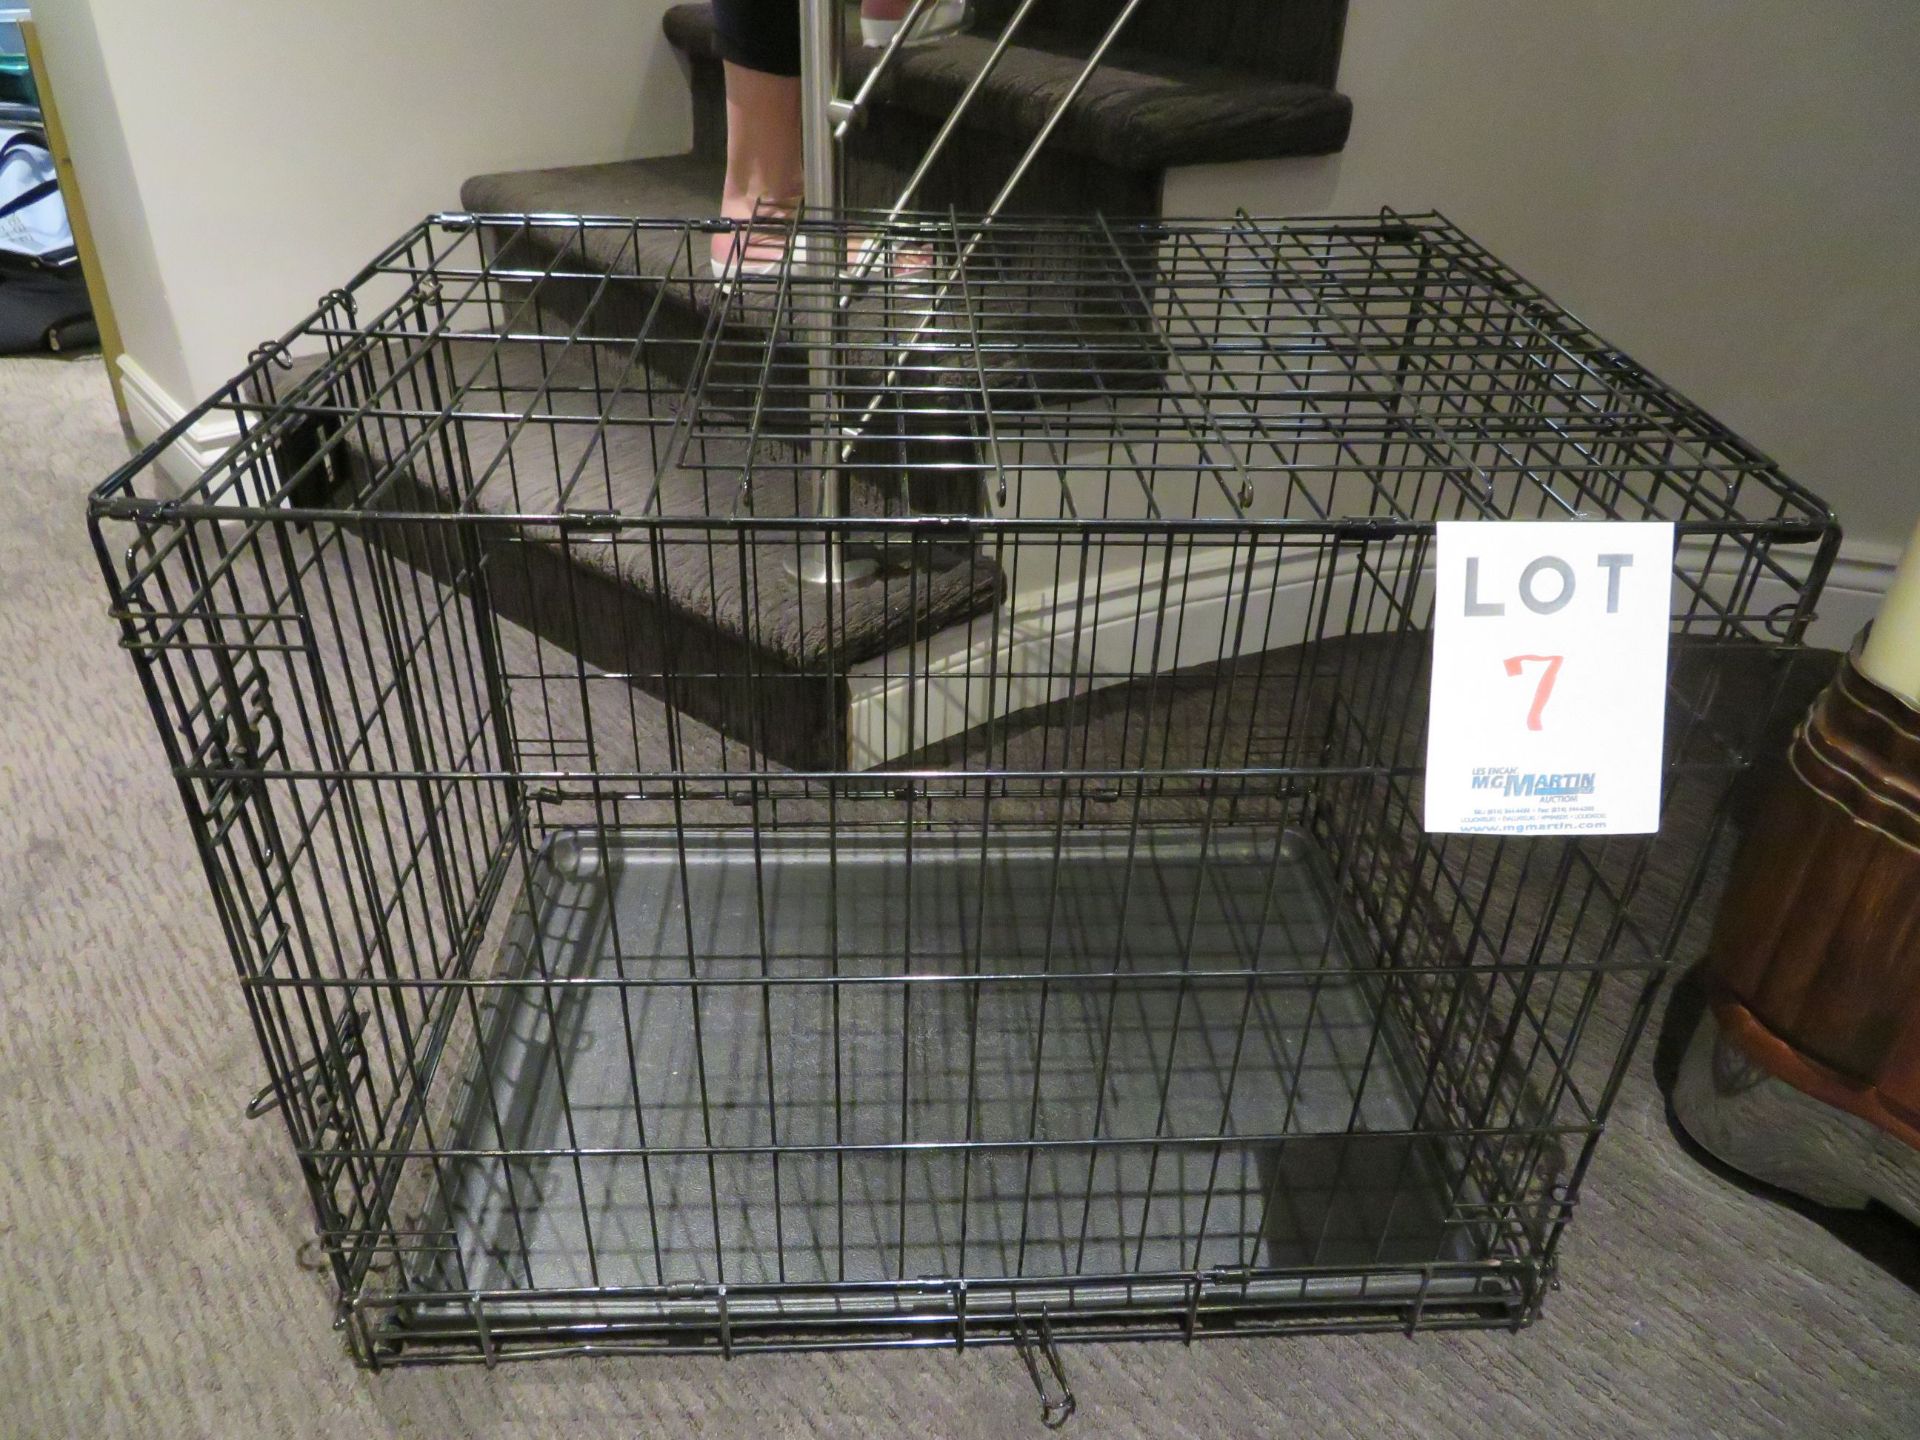 Folding dog cage approx. 30"w x 21"d x 23"h